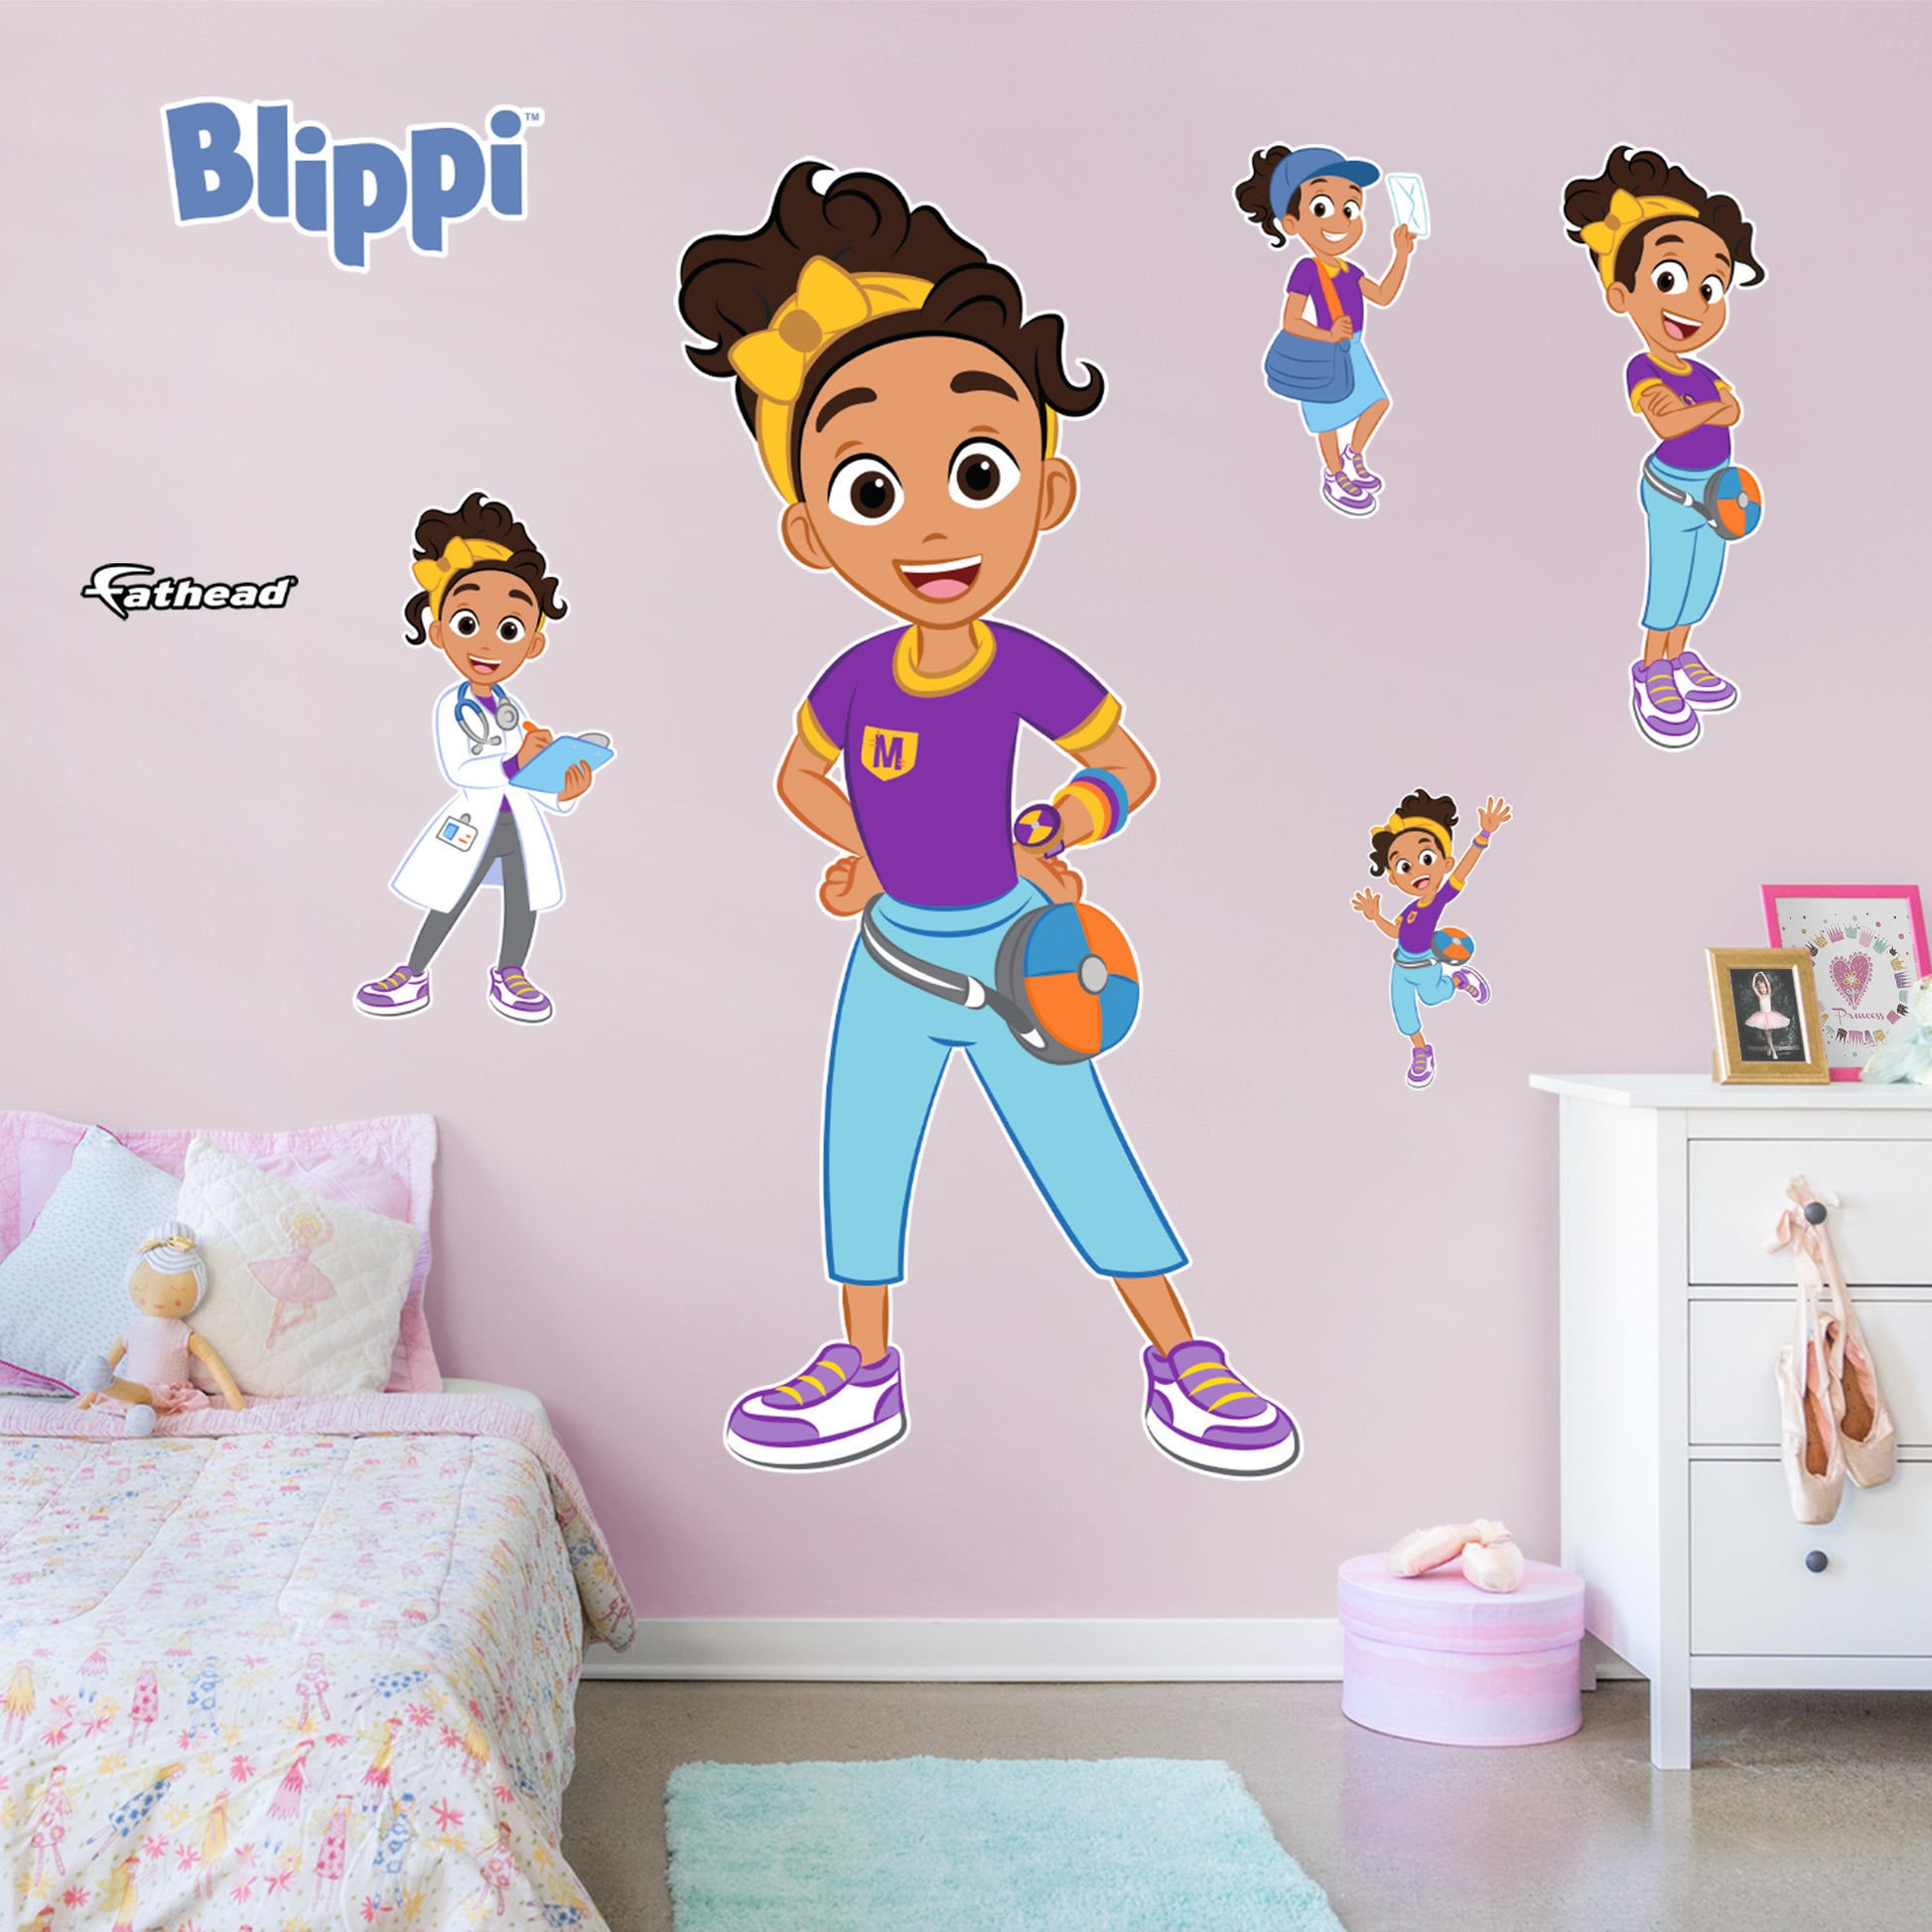 Life-Size Character +6 Decals  (35"W x 74"H) 